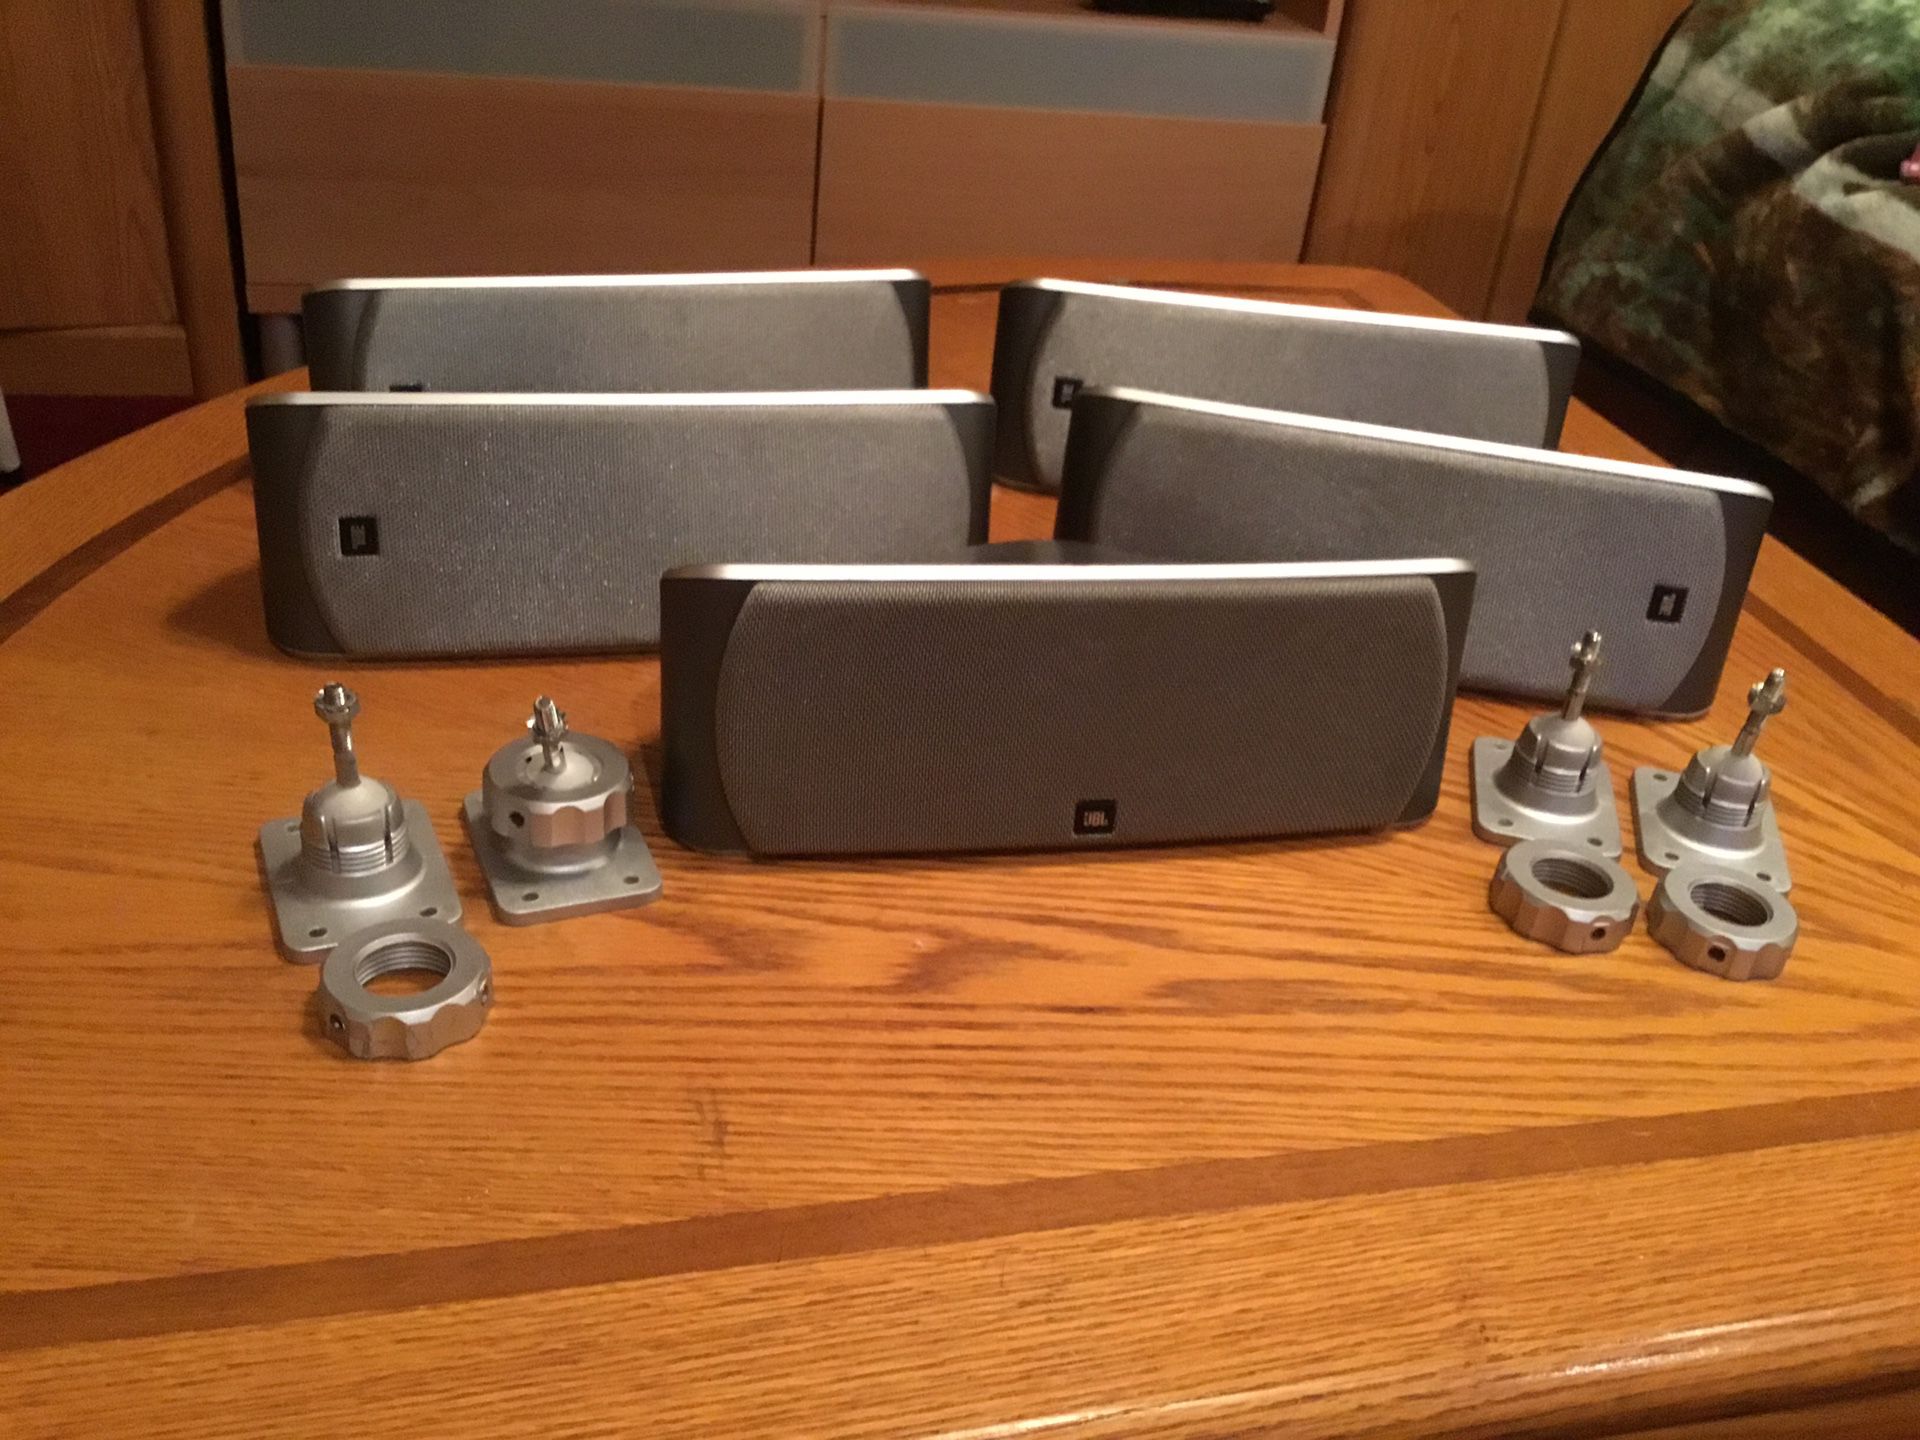 JBL SC300 Surround Sound Set...Look like new!REDUCED TO SELL!